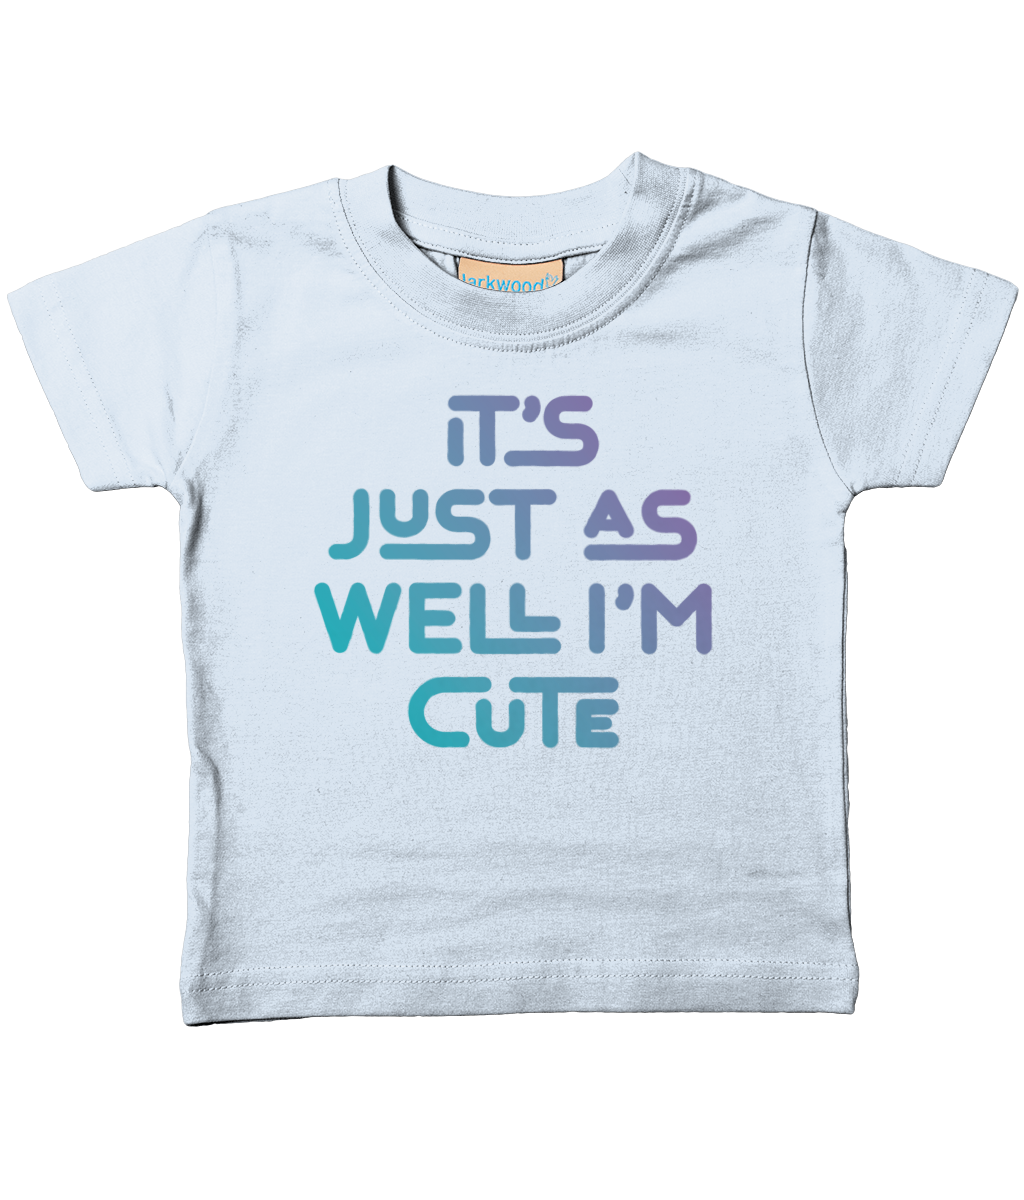 It's just as well I'm cute. Kid's t-shirt for a cheeky toddler, ideal gift